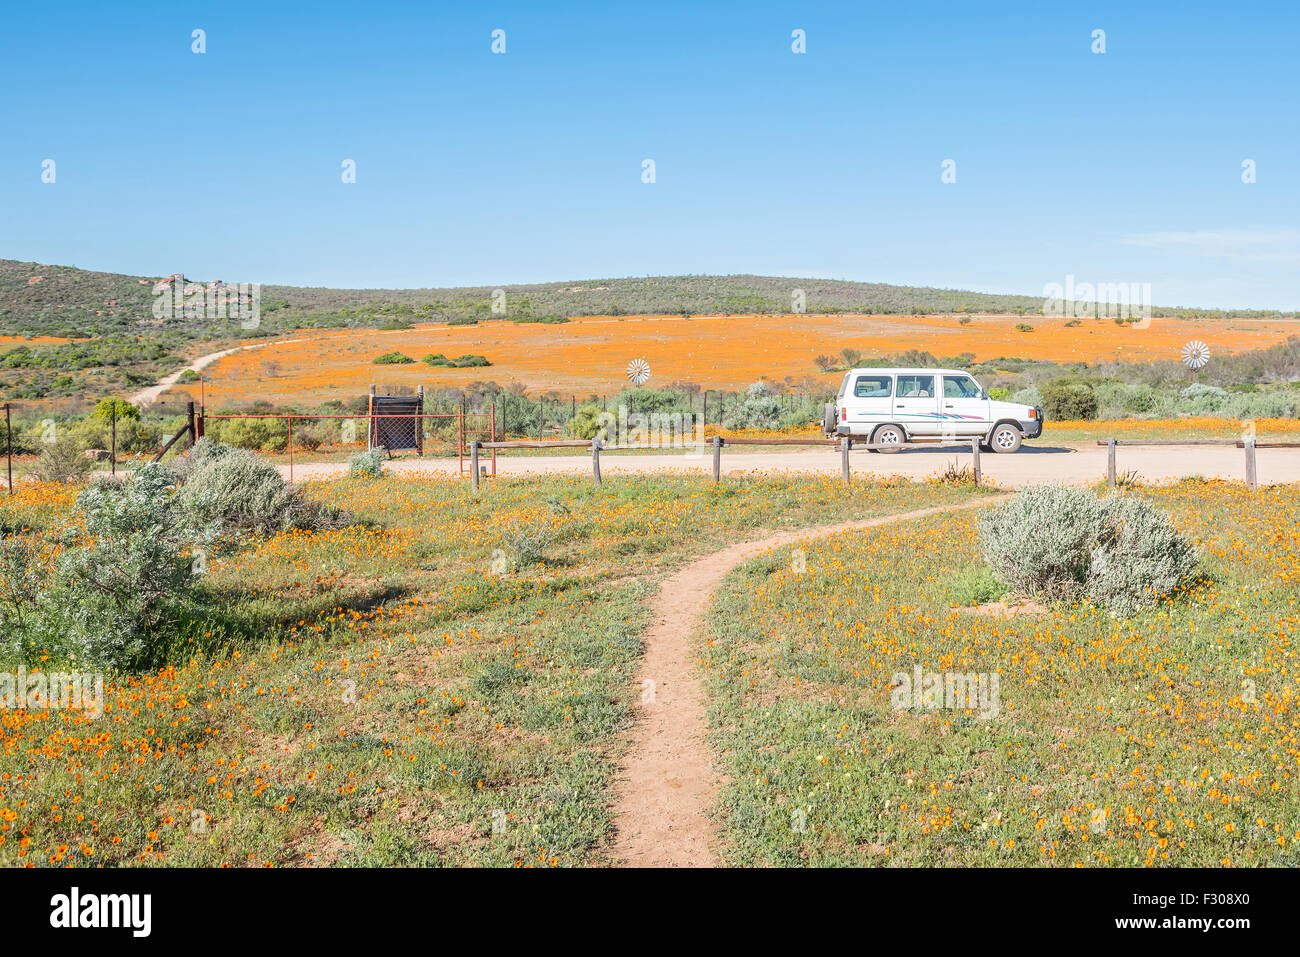 SKILPAD, SOUTH AFRICA - AUGUST 14, 2015: Large fields of orange daisies dominate the landscape of the Namaqua National Park at S Stock Photo